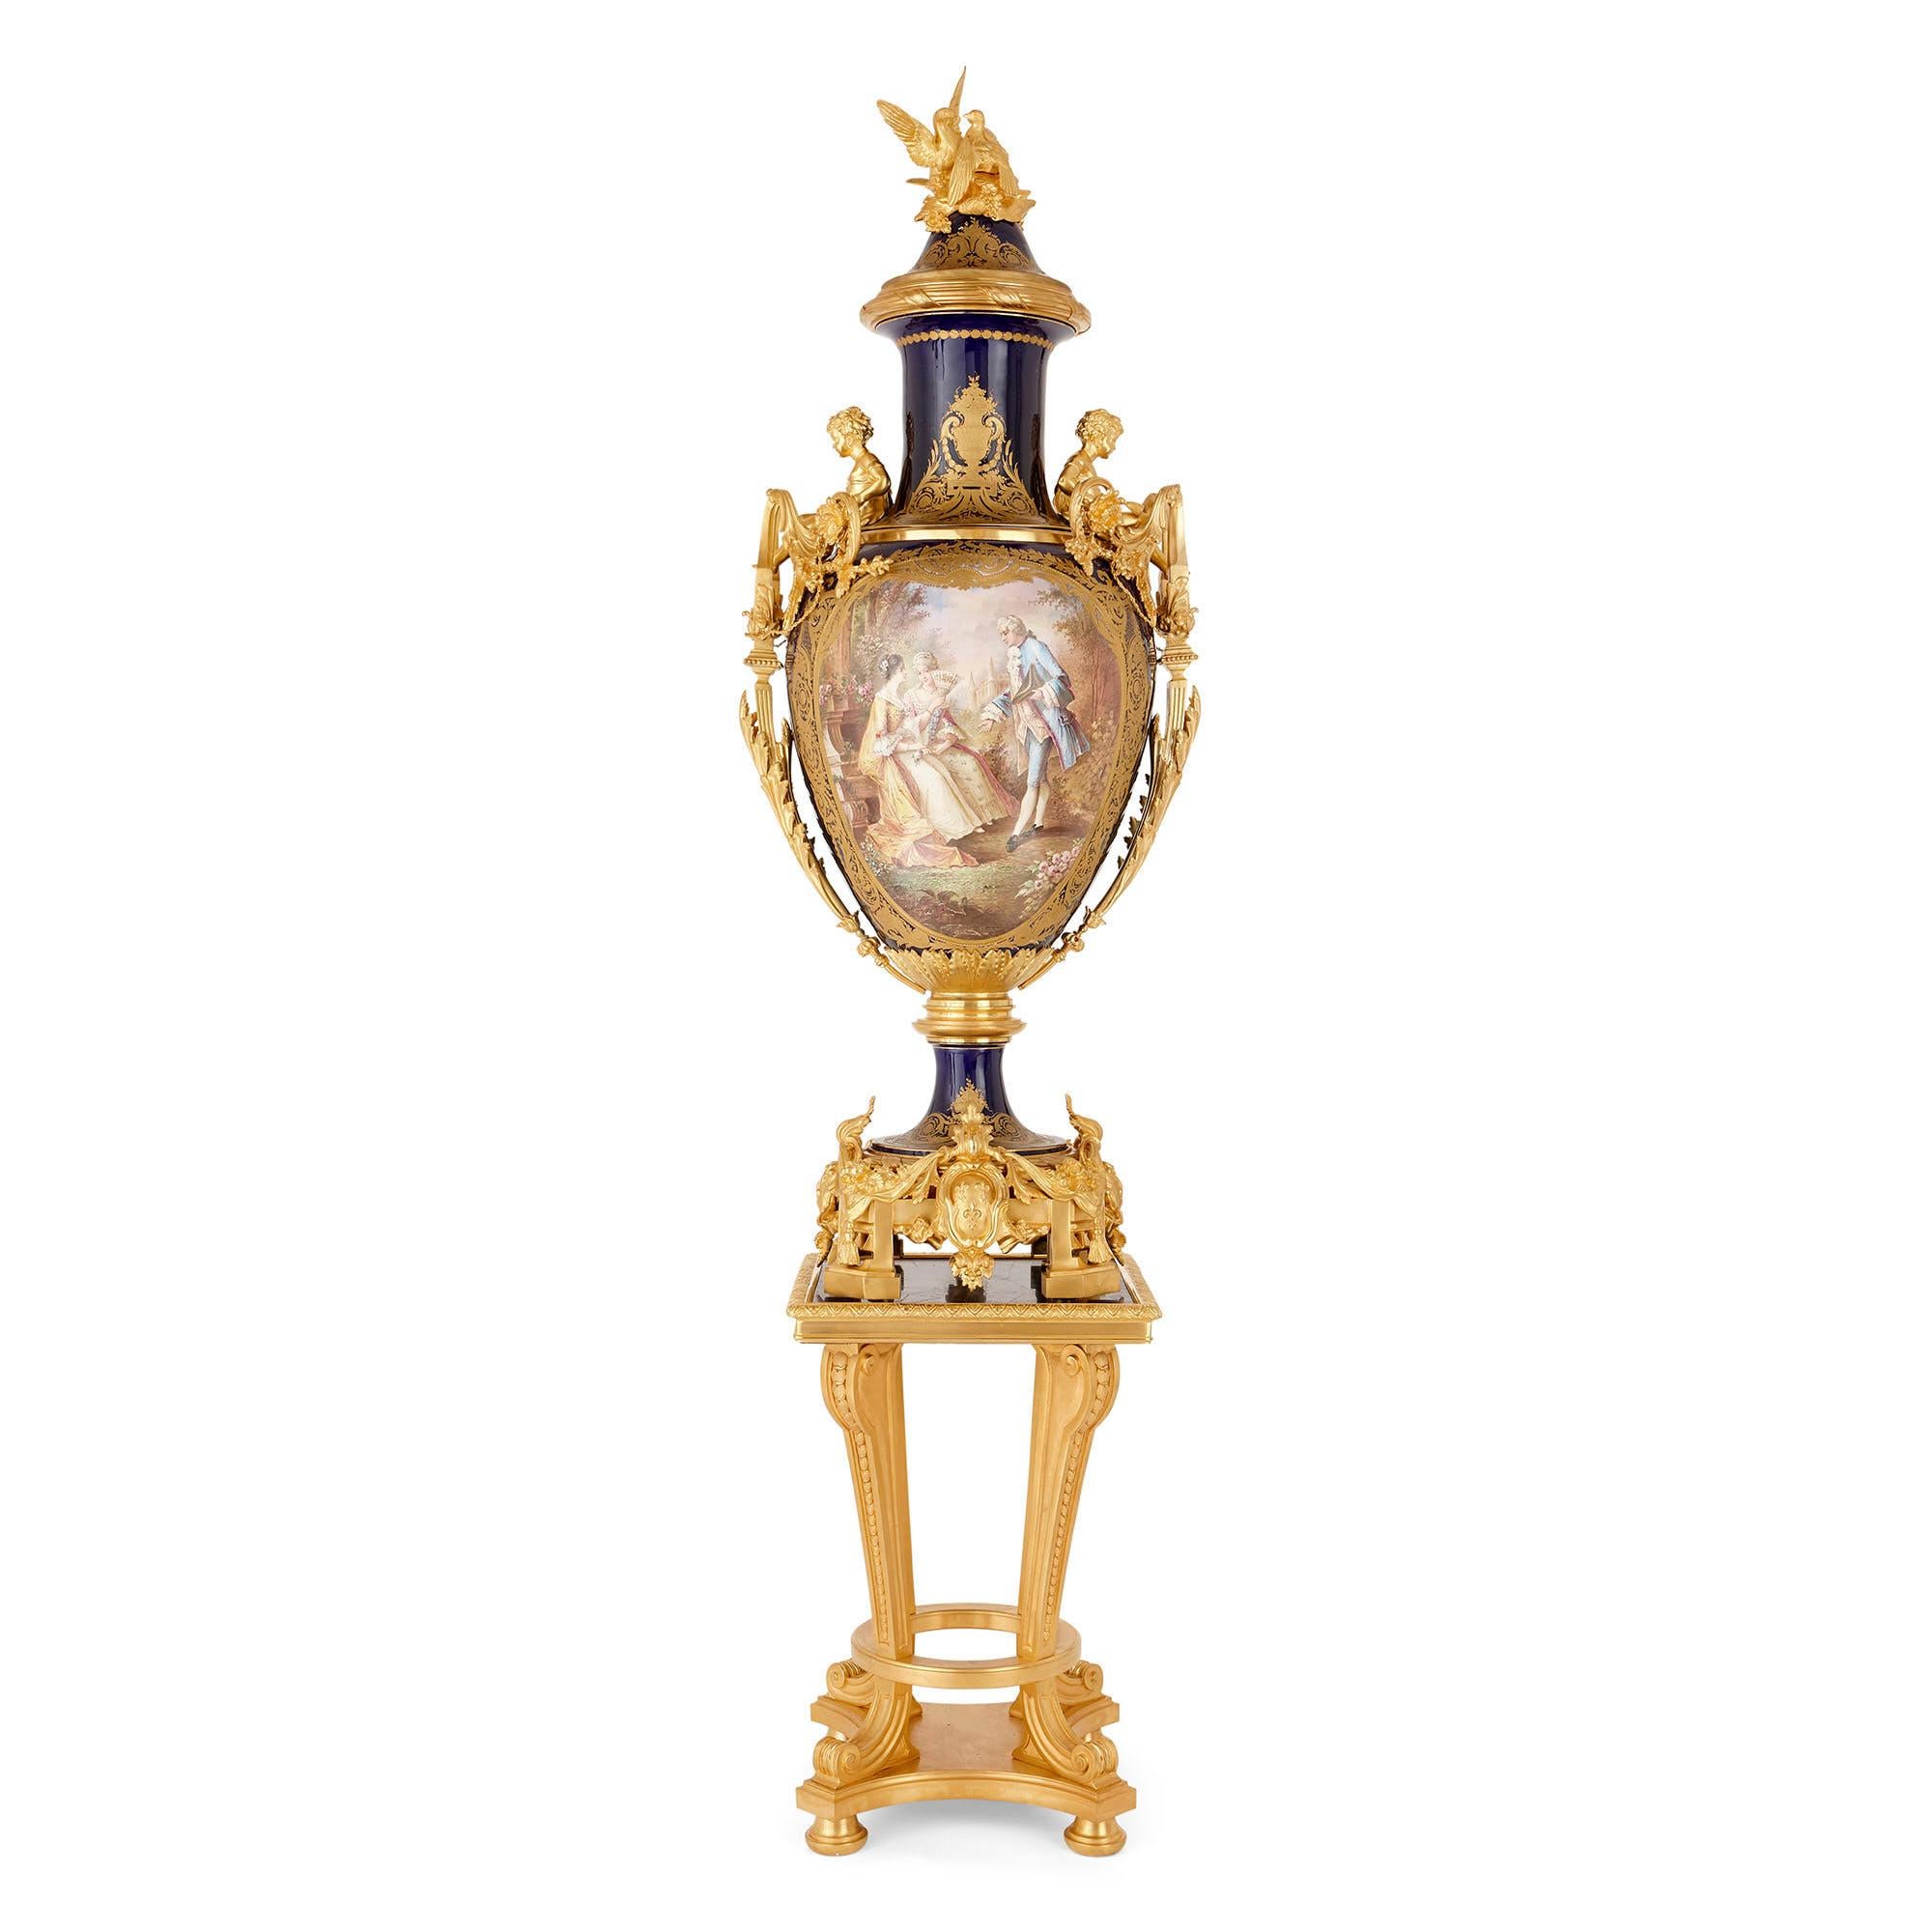 This impressive and important collection of three Sèvres style vases forms a remarkable group. The three vases, while not constituting a matching set, combine to create a group strikingly similar in style and composition. The fact that the largest